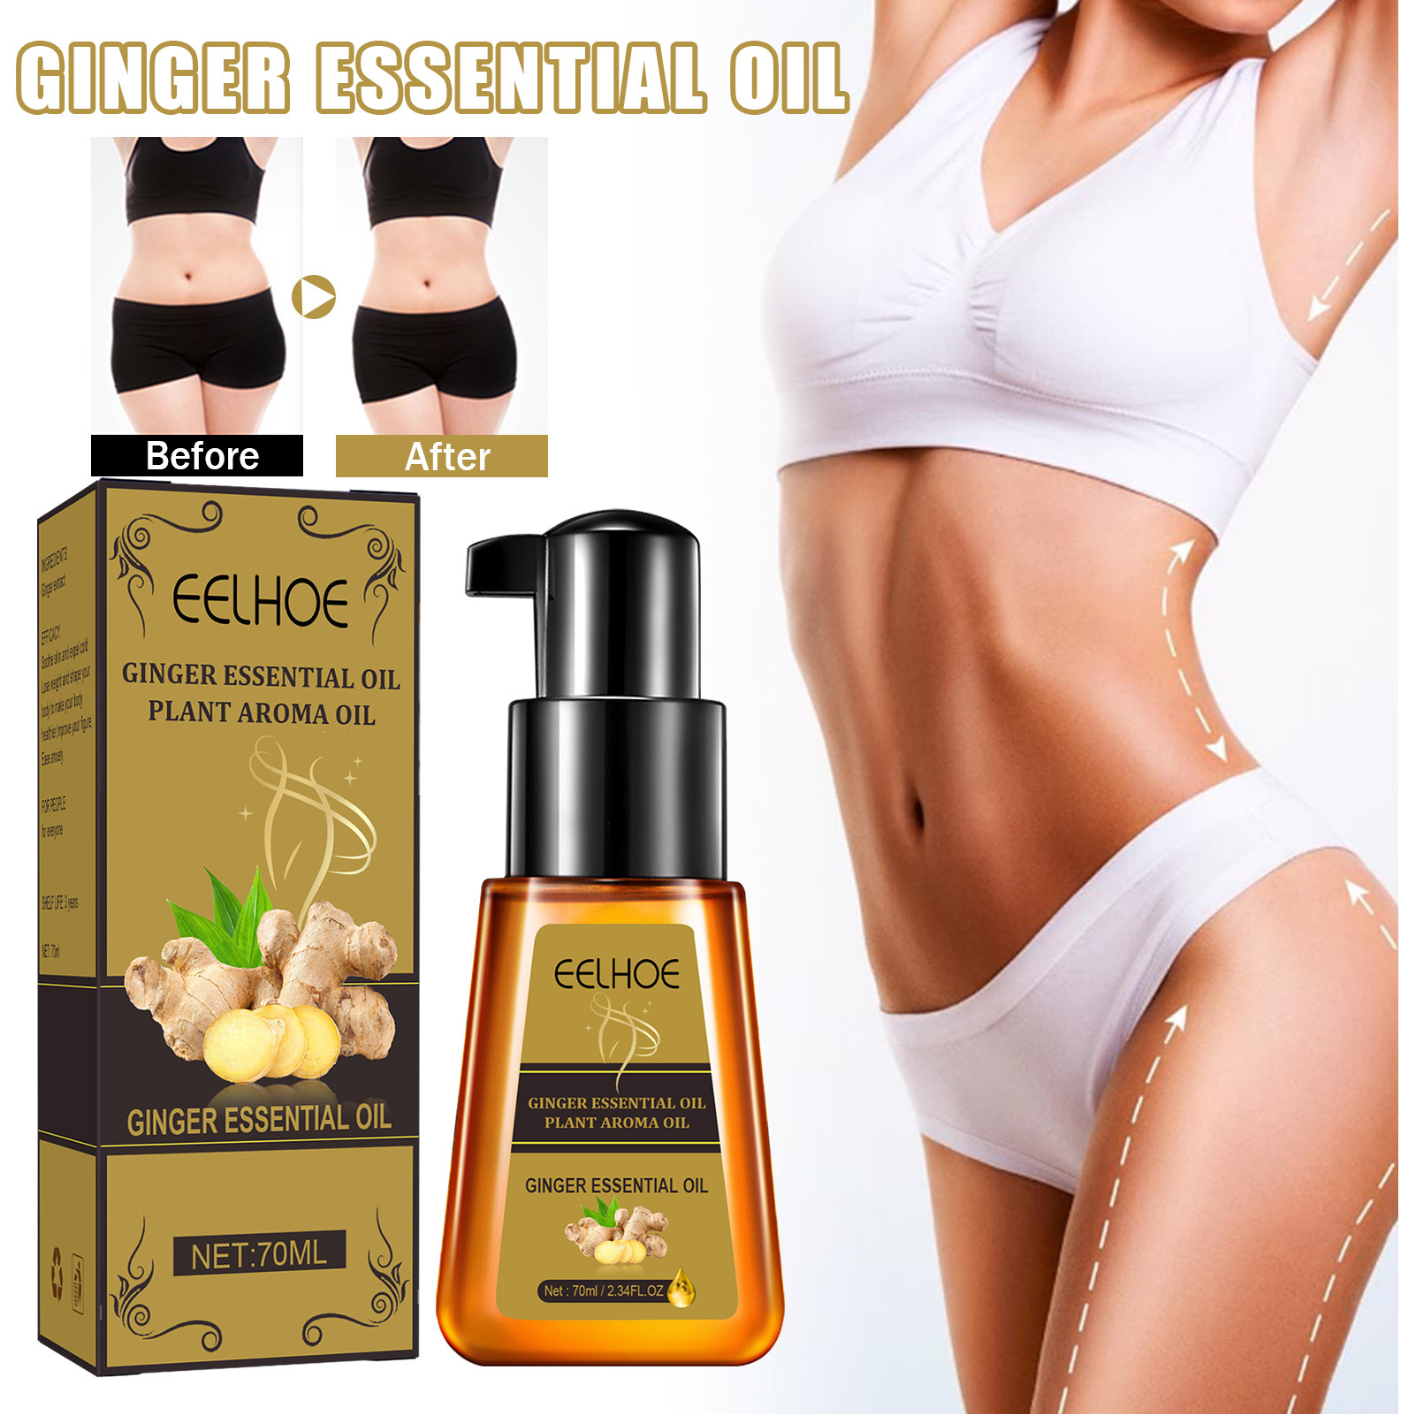 Ginger Massage Oil, 70ml Ginger Slimming Oil Firm Skin Improve Circulation Natural Slimming Essential Oil for Shaping Weight Loss Making The Skin Firm And Elastic